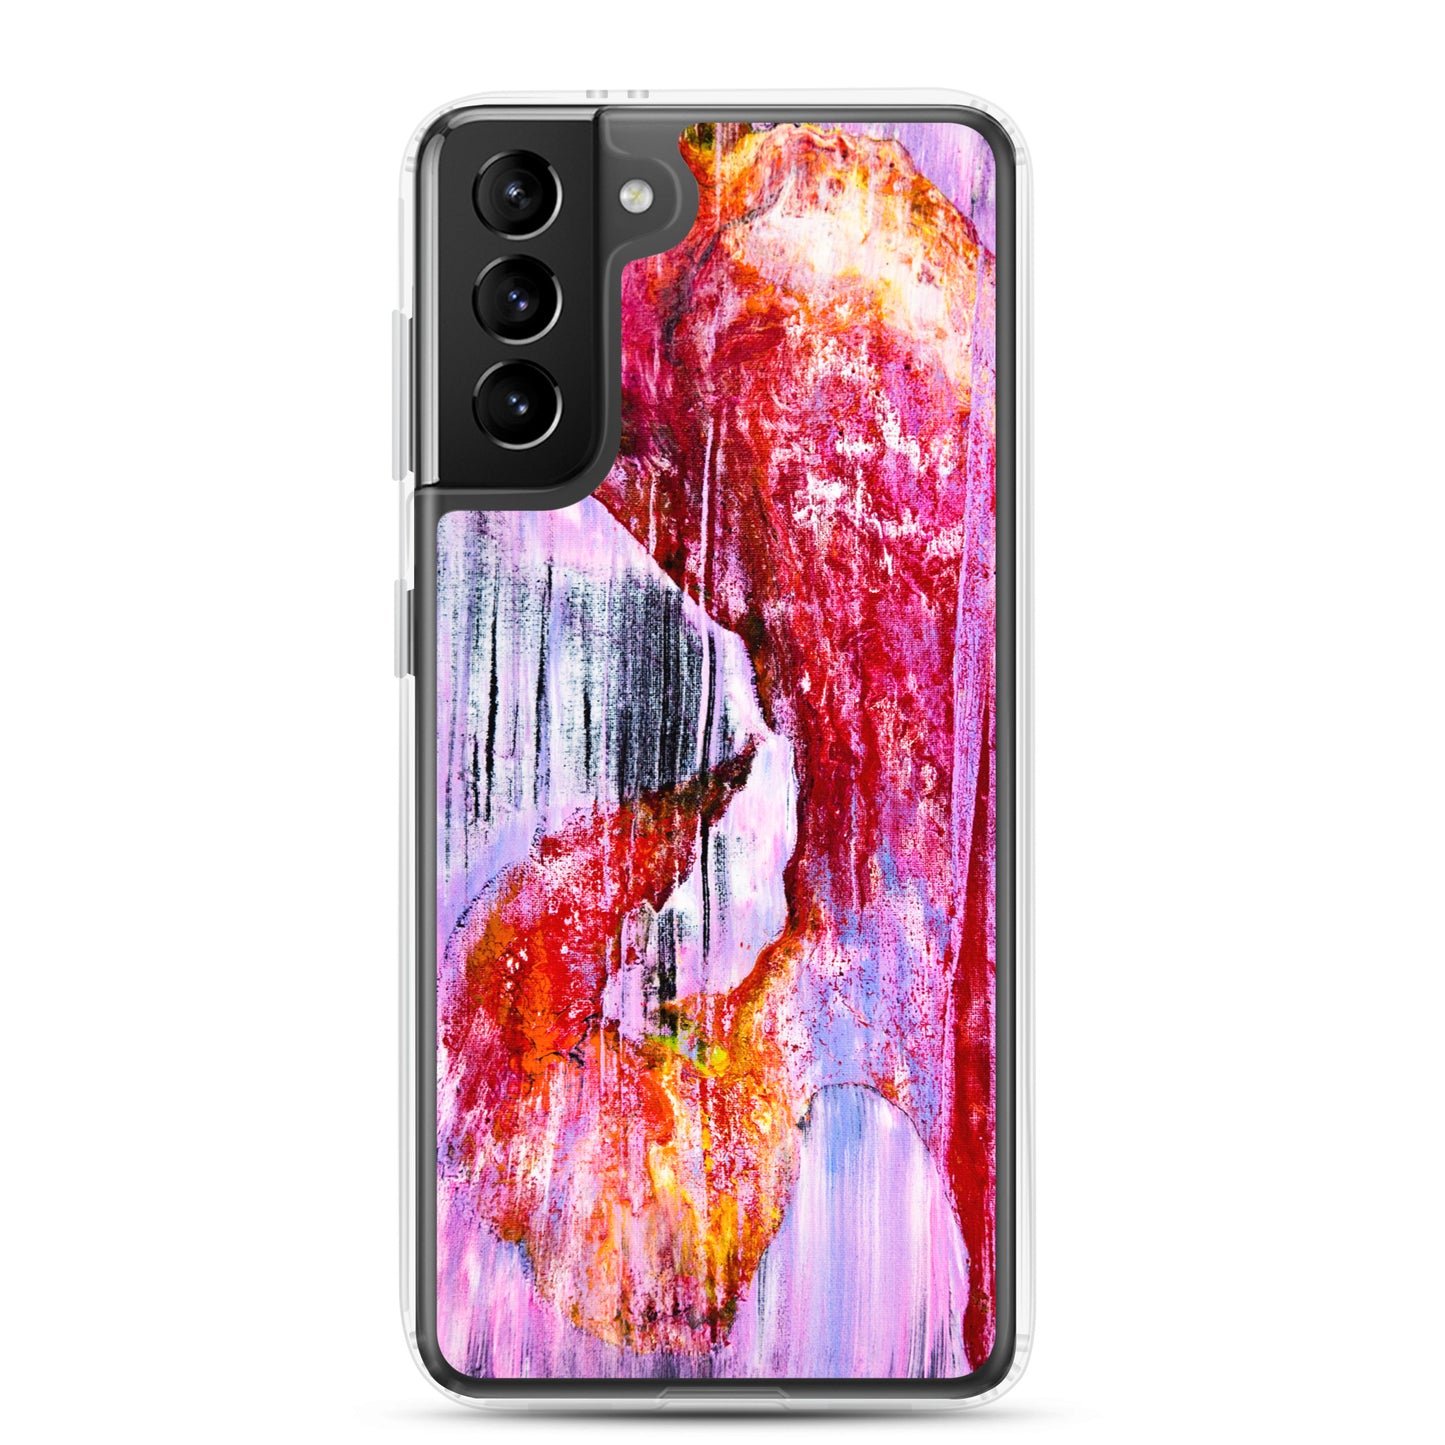 NightOwl Studio Custom Phone Case Compatible with Samsung Galaxy, Slim Cover for Wireless Charging, Drop and Scratch Resistant, Pink Rain